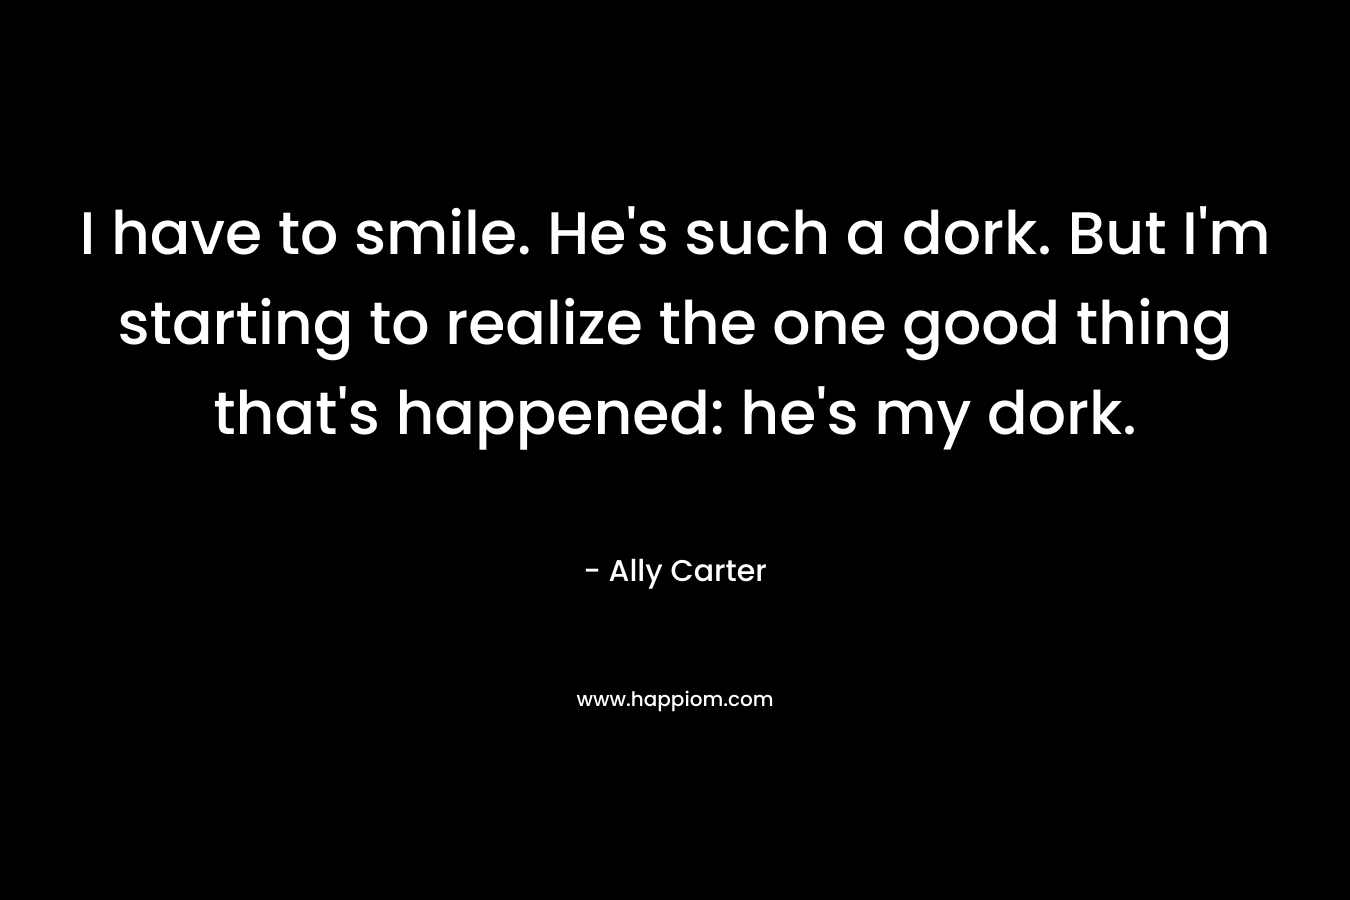 I have to smile. He’s such a dork. But I’m starting to realize the one good thing that’s happened: he’s my dork. – Ally Carter